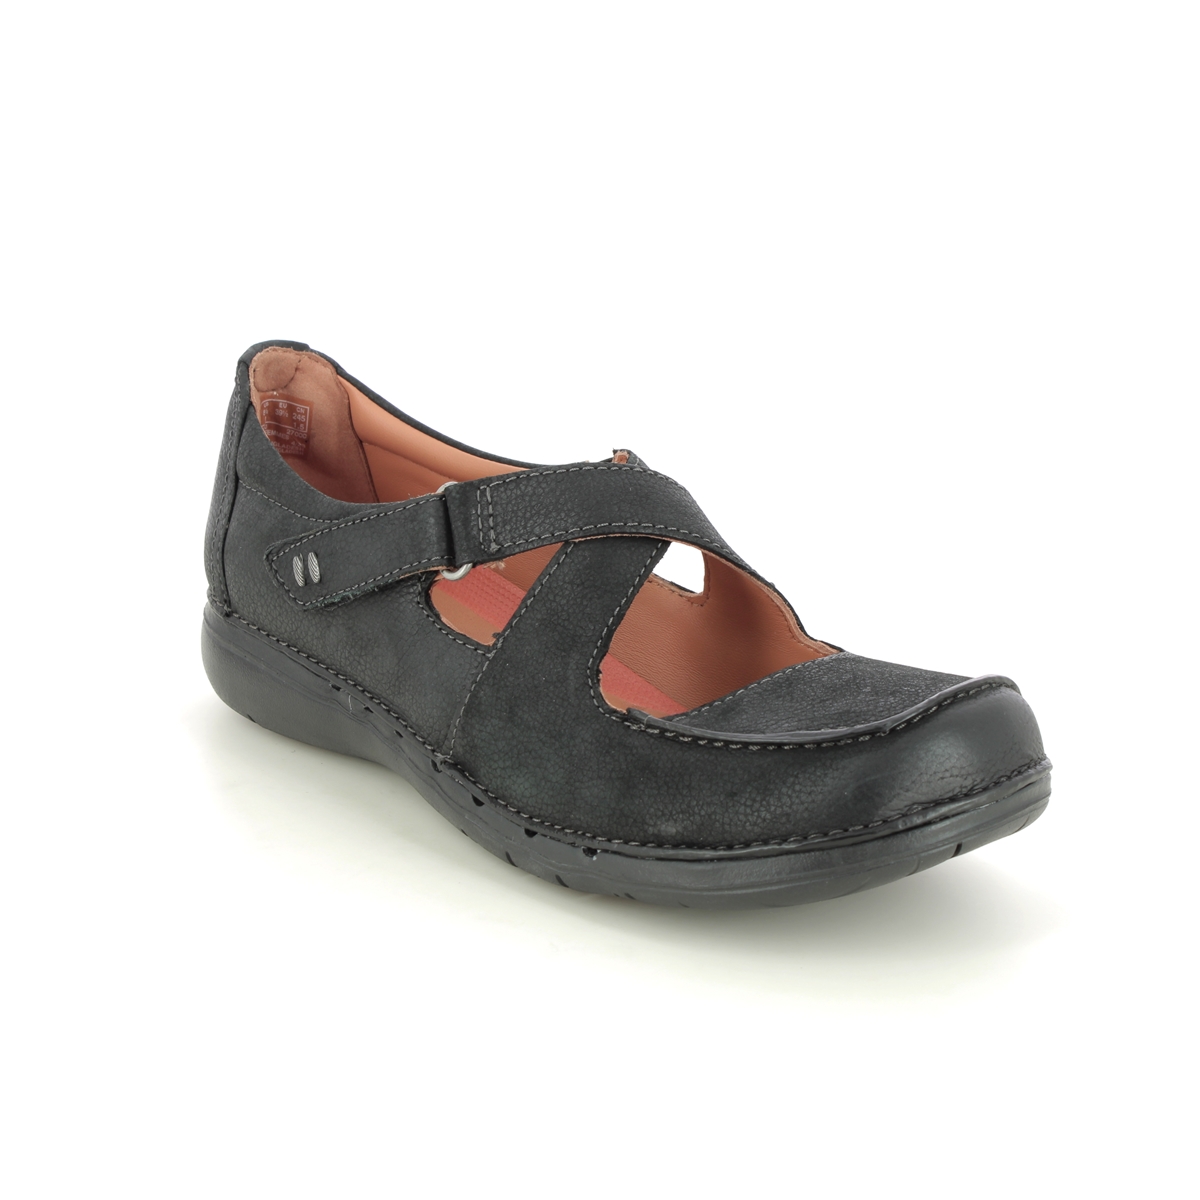 Clarks Un Loop Strap Black Leather Womens Mary Jane Shoes 749704D In Size 4 In Plain Black Leather